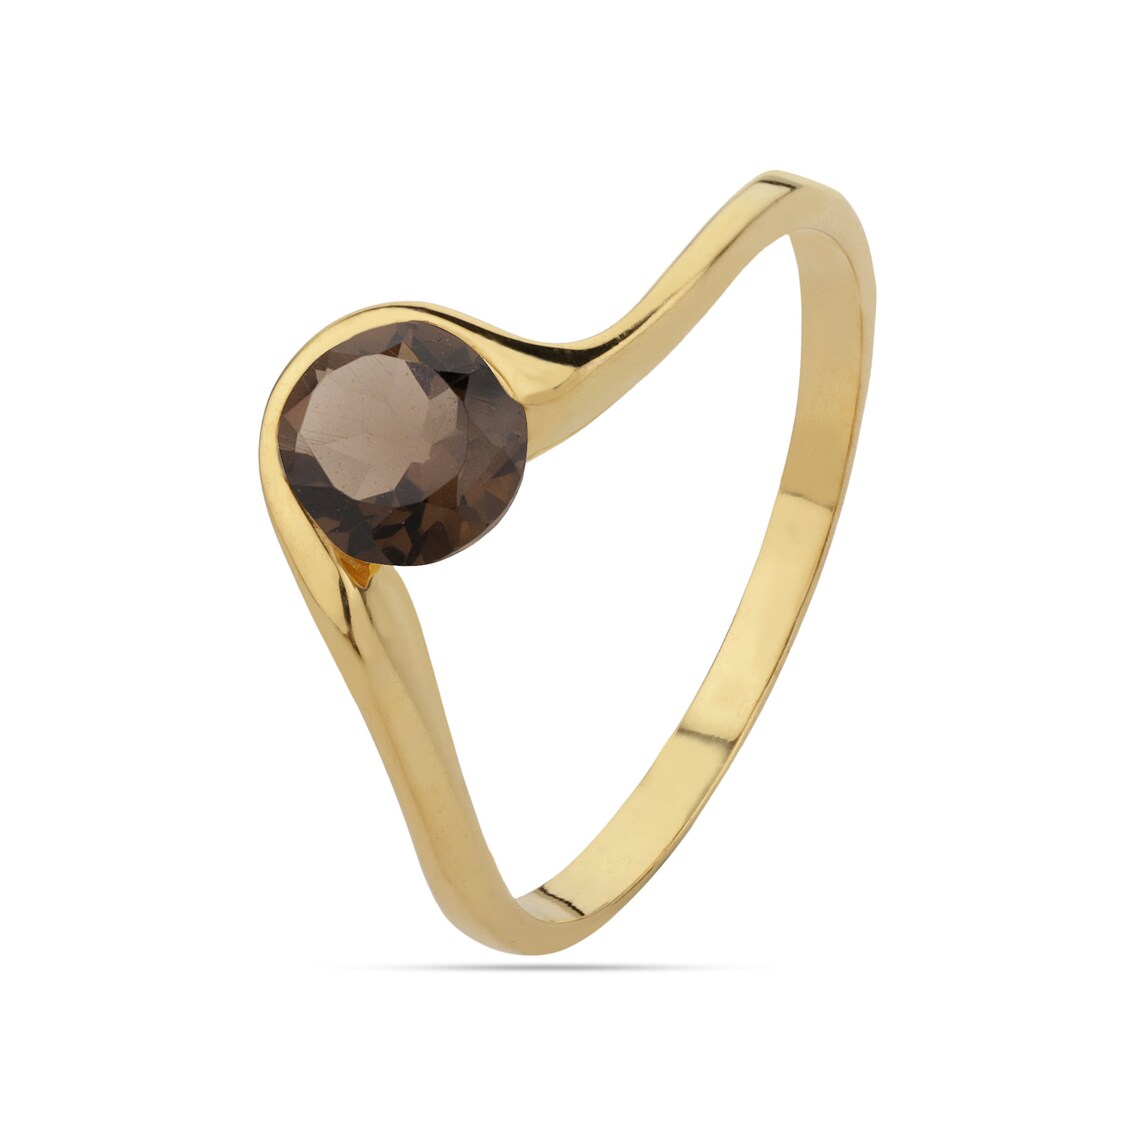 Smoky Quartz Ring - Gold Plated Ring - 5x5mm Round Cut Sterling Silver Smoky Ring - Handmade Indian Jewelry